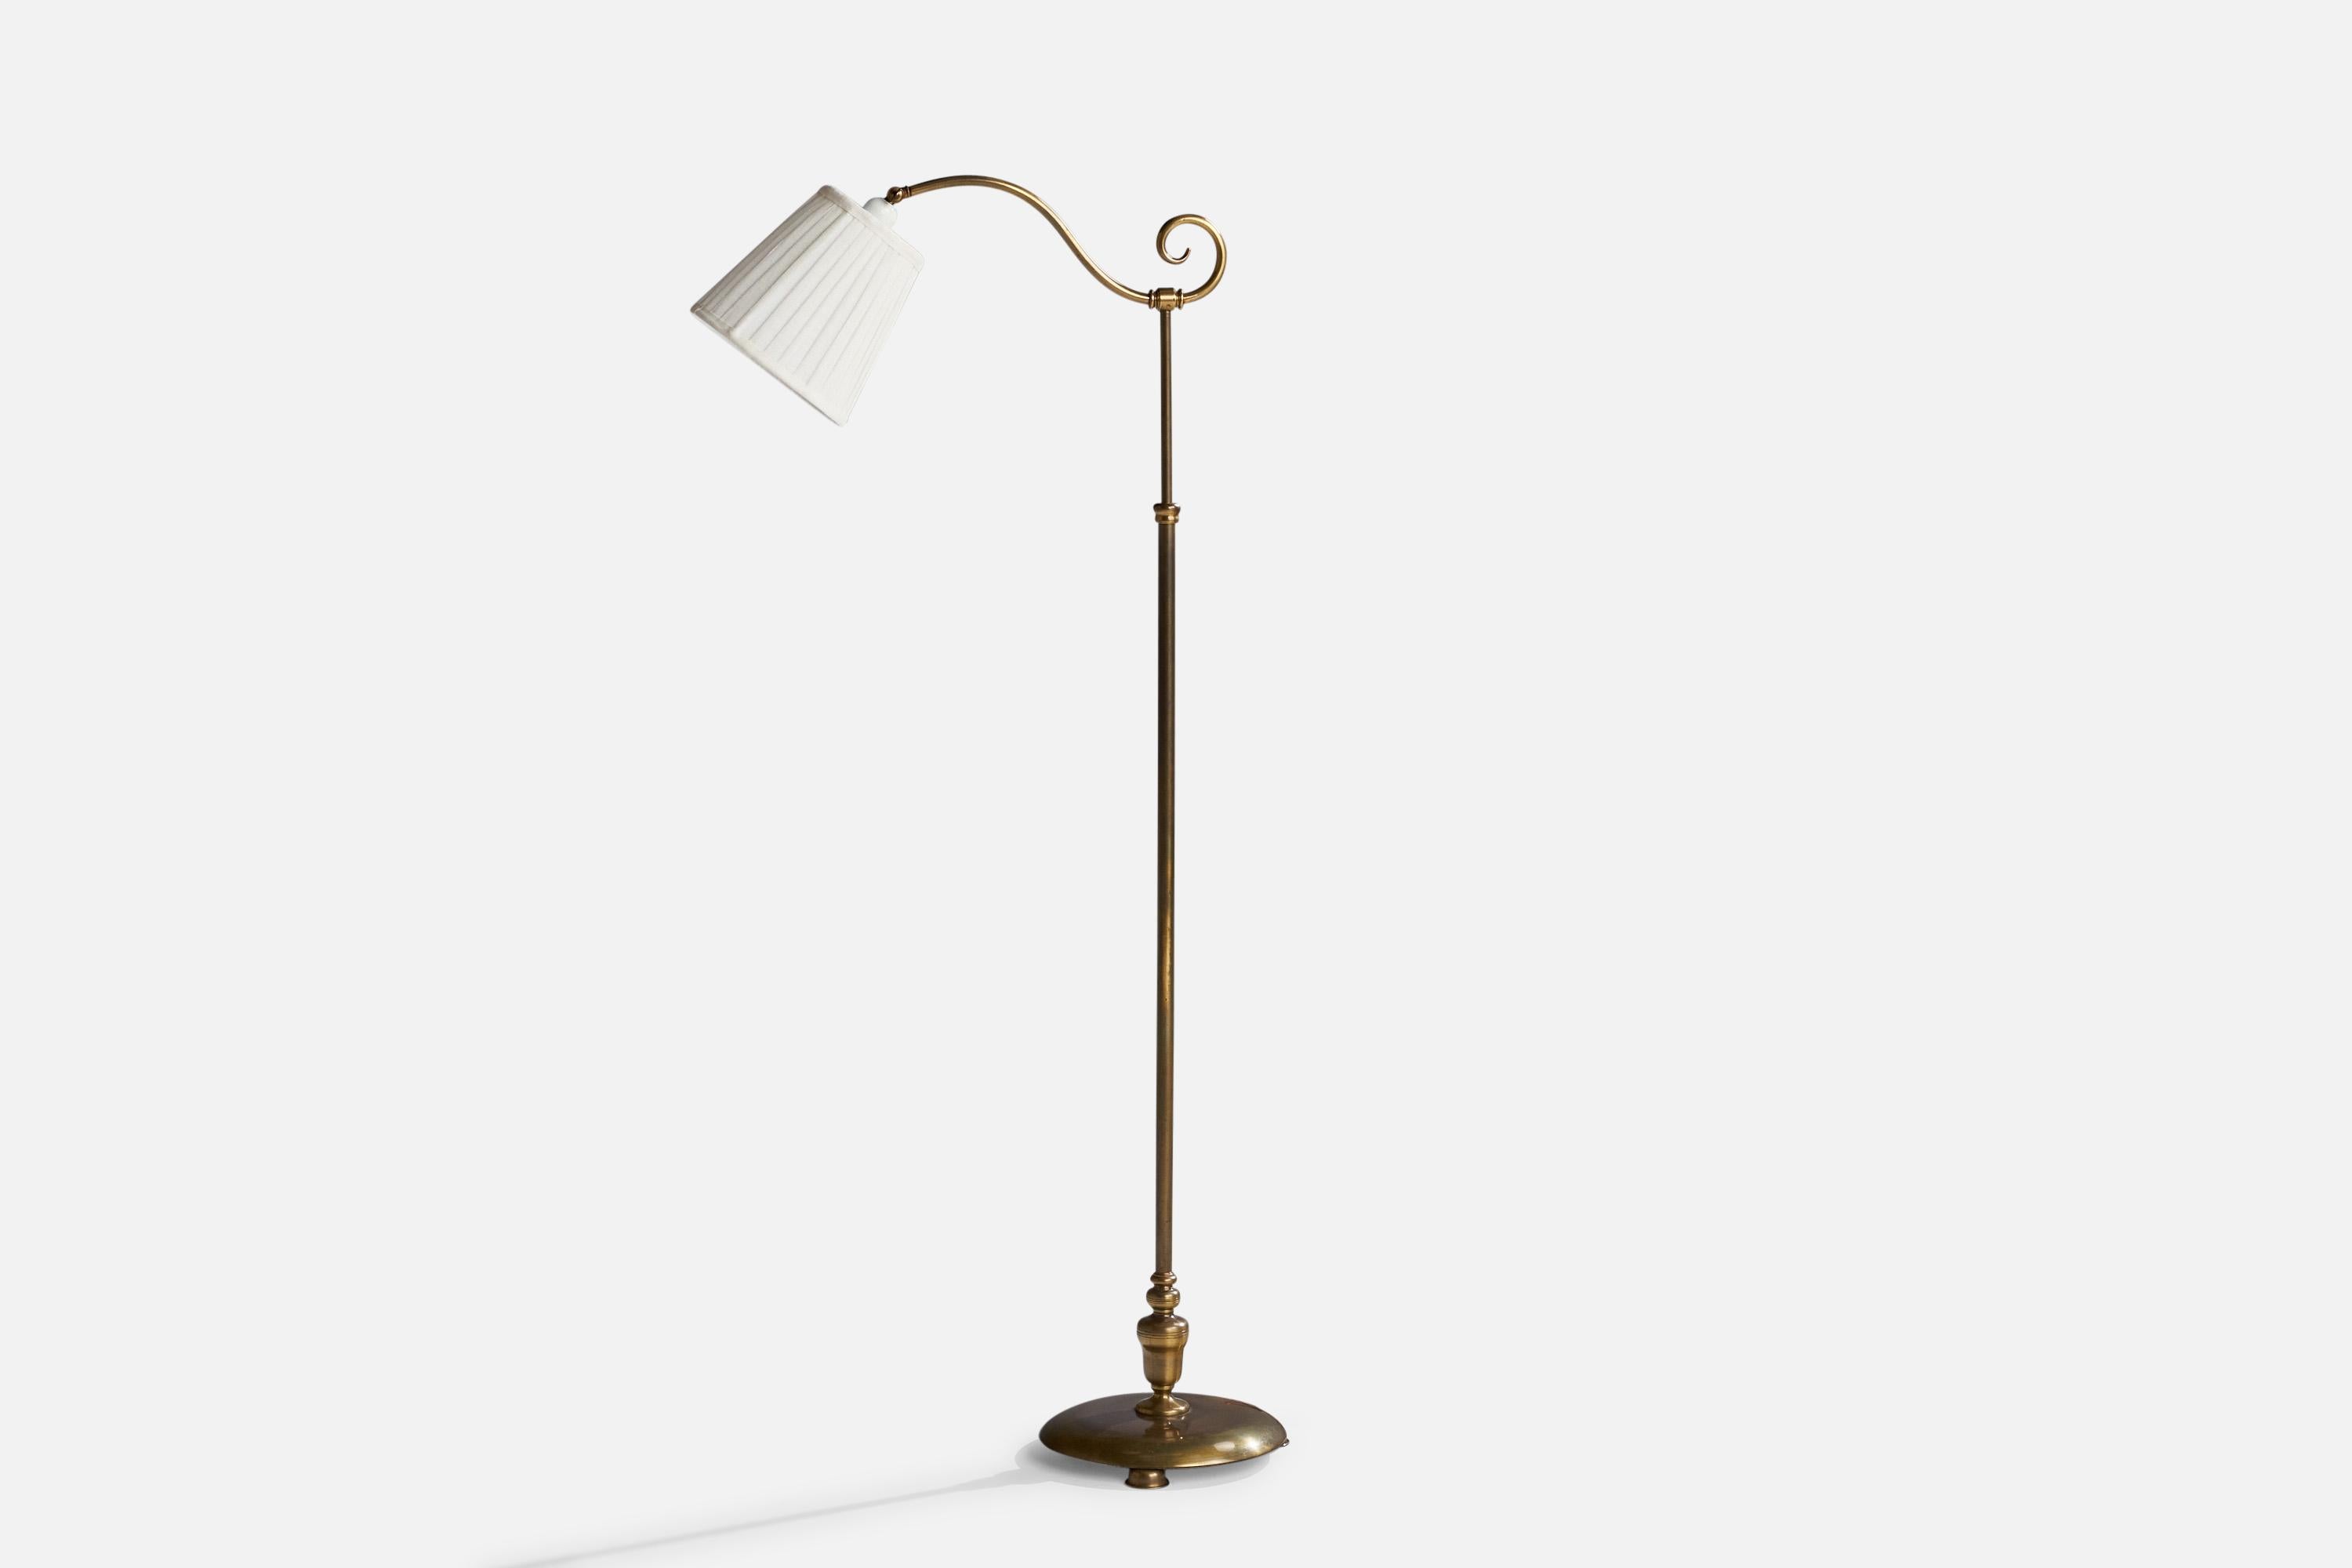 An adjustable brass and white fabric floor lamp designed and produced in Sweden, c. 1940s.

Dimensions will vary depending upon adjustment.
Overall Dimensions (inches): 57” H x 11”  W x 23” D
Stated dimensions include shade.
Bulb Specifications: